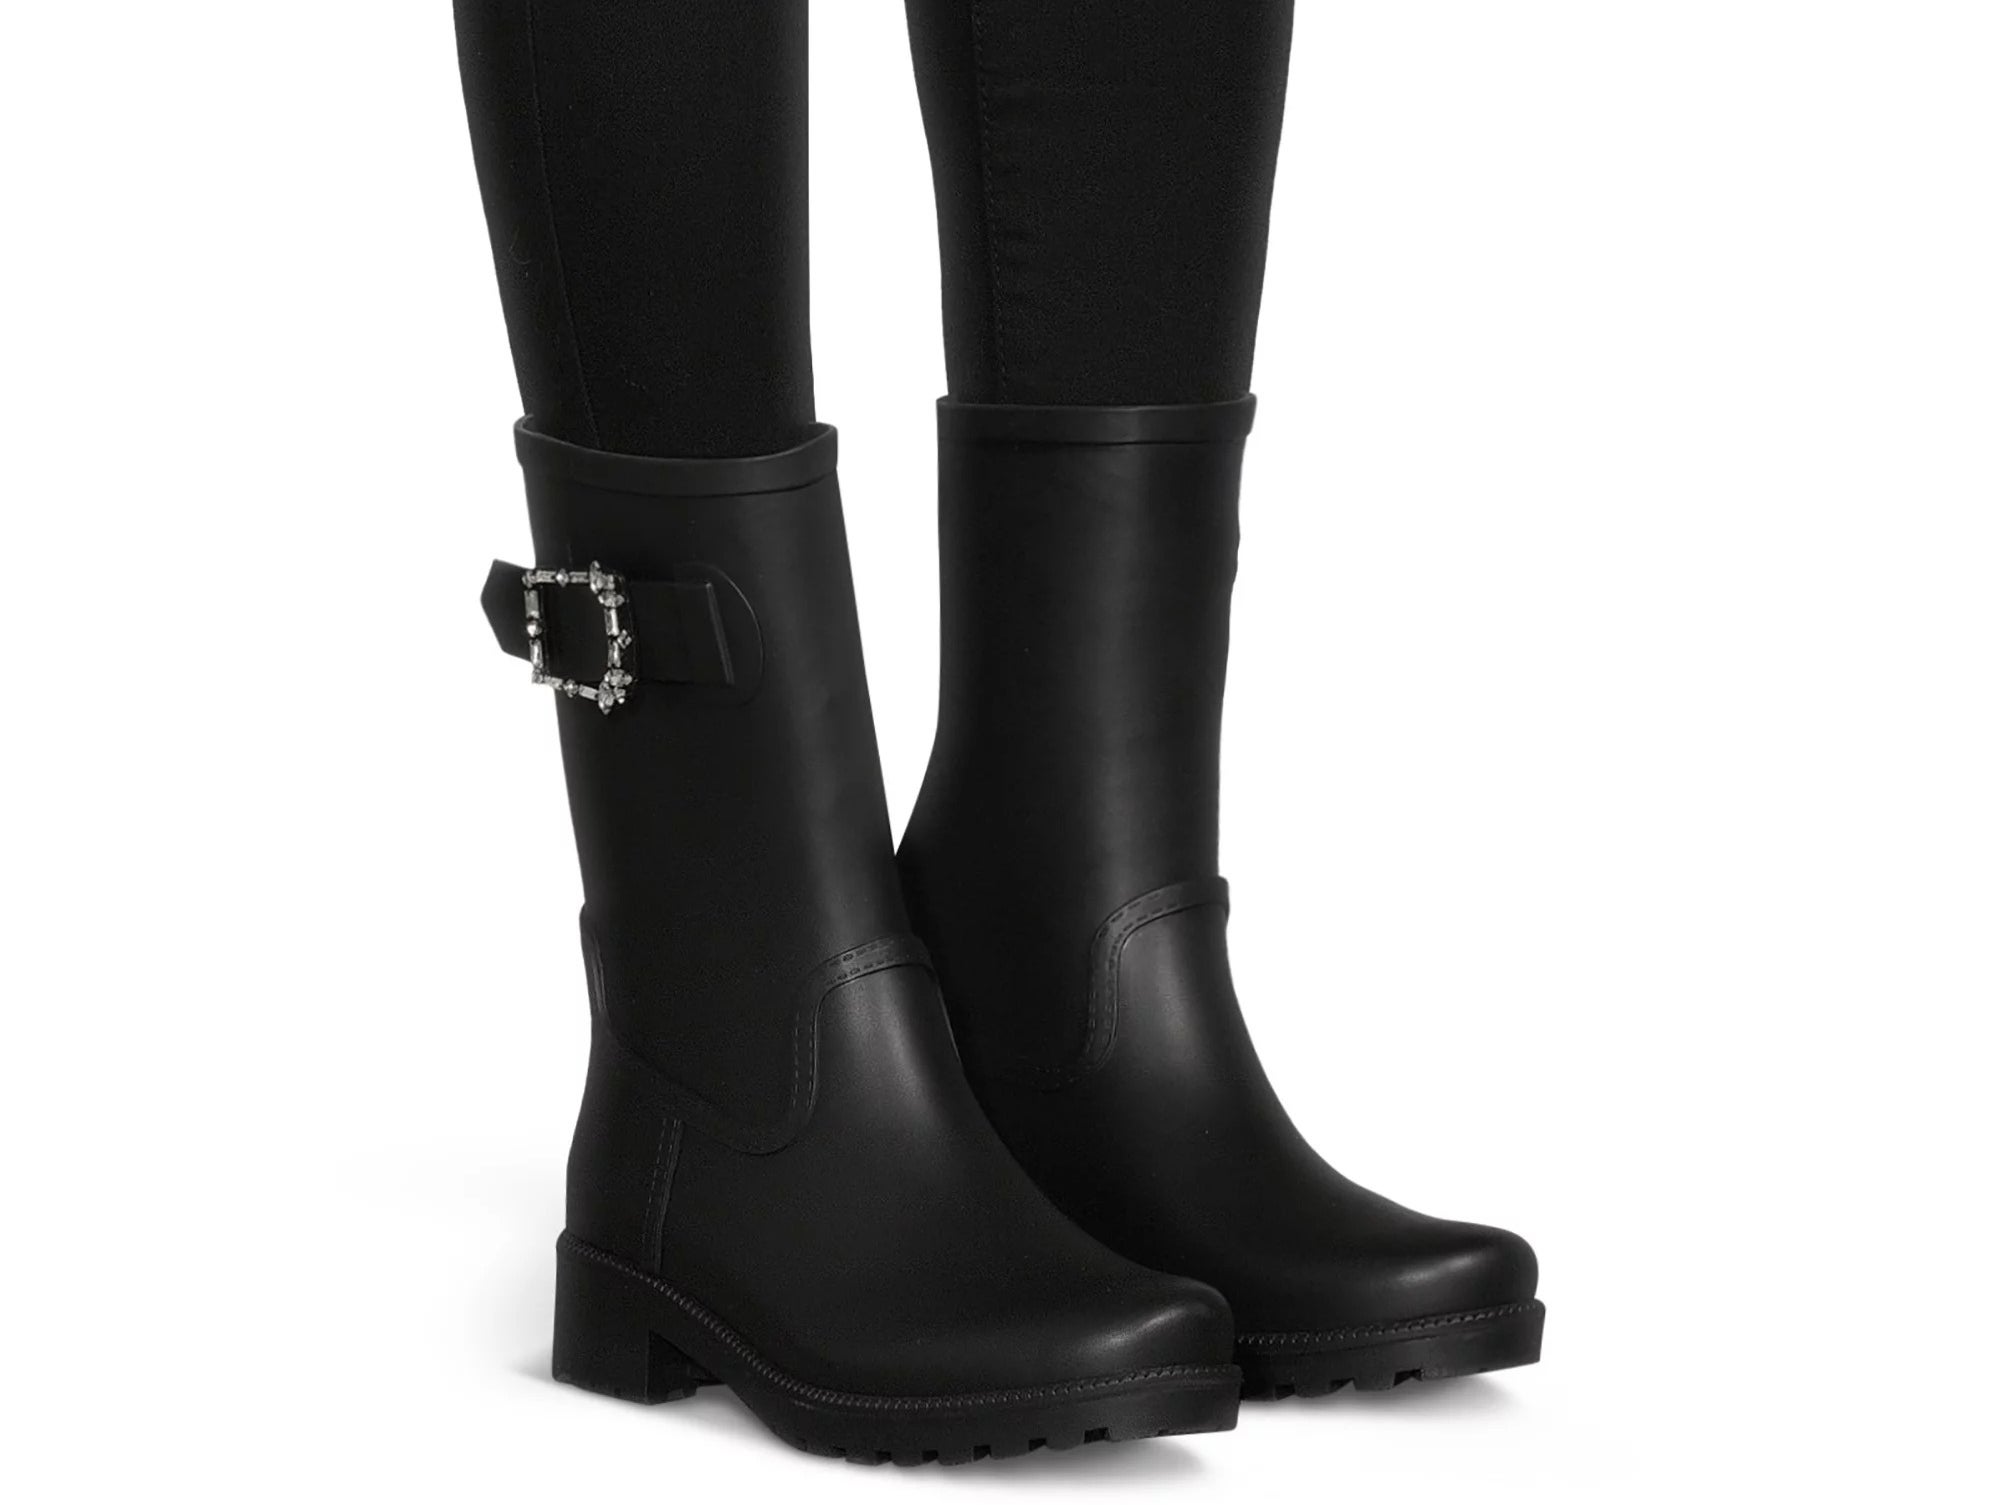 A model wearing the  mid-calf height pull on rubber boots